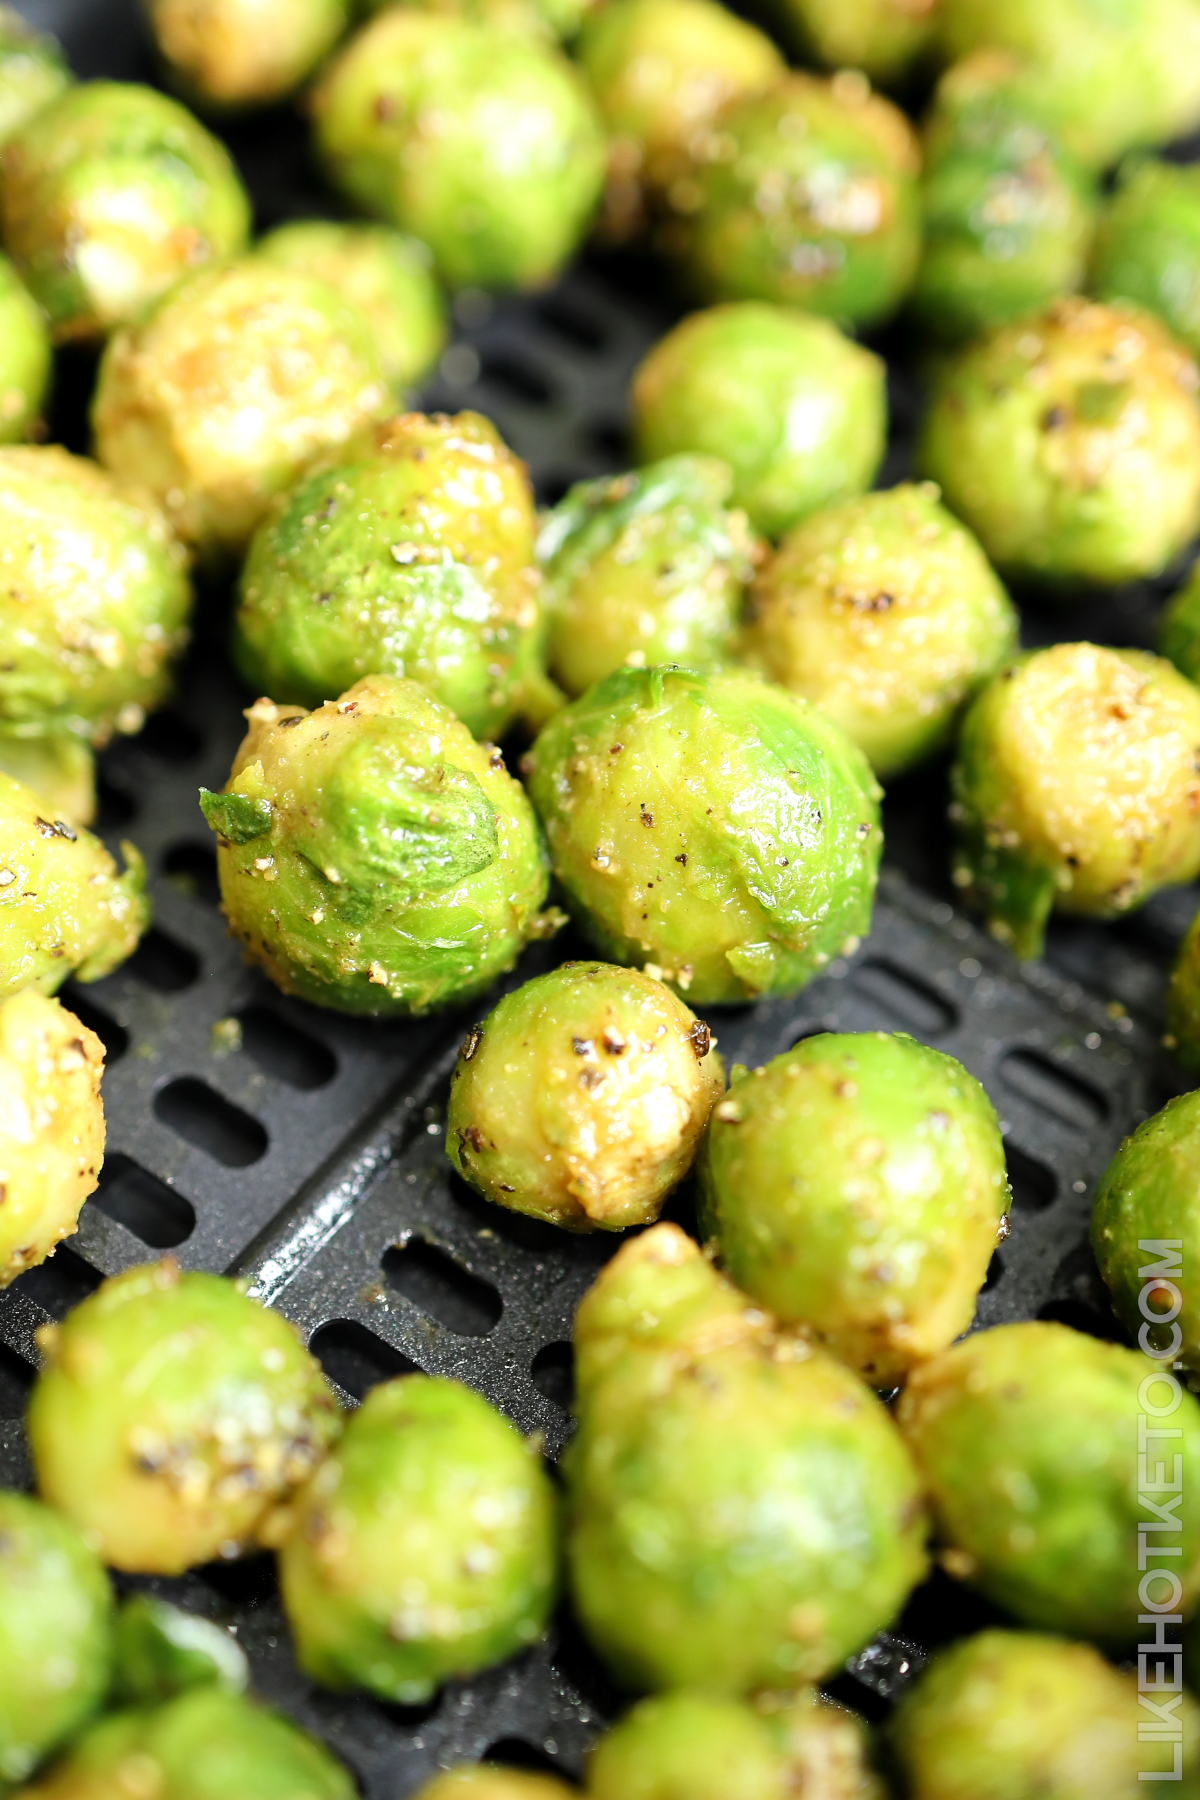 Frozen Brussel sprouts coated in oil and spices, inside an air fryer basket.